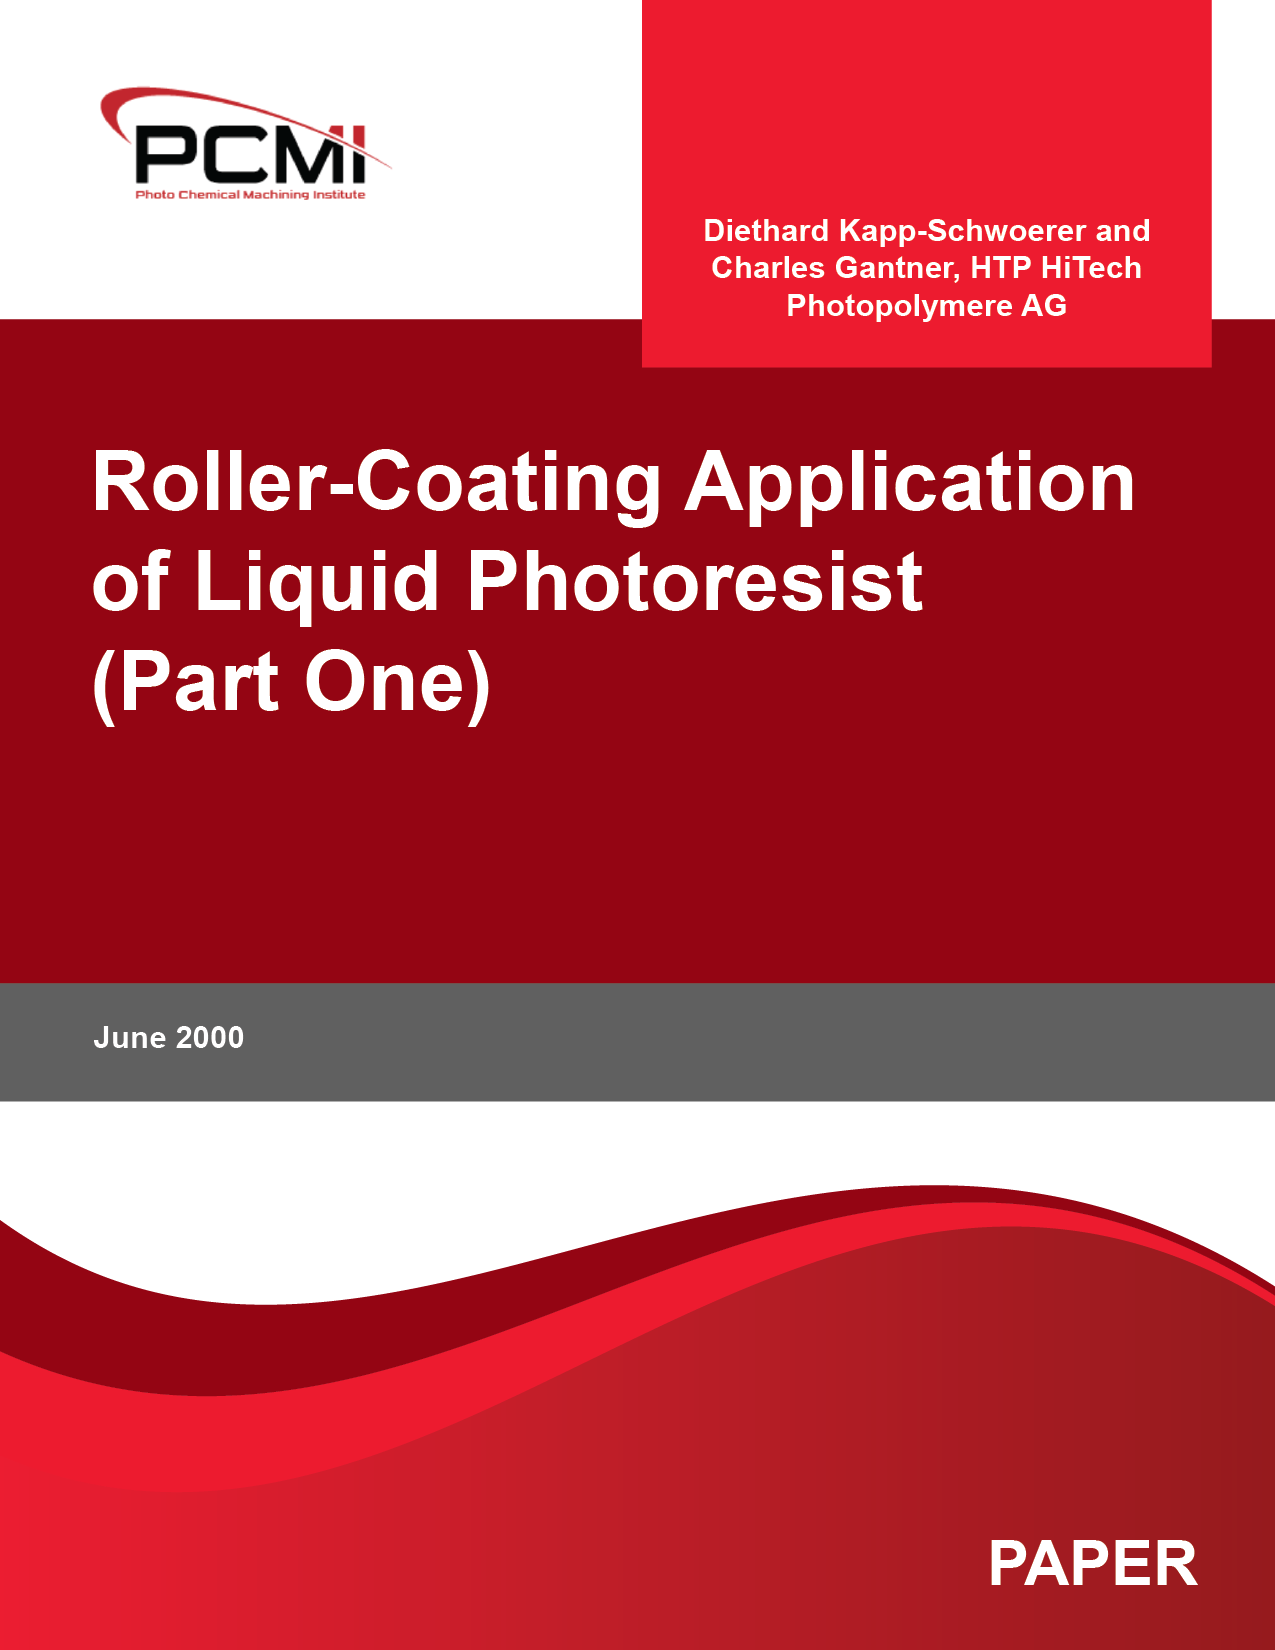 Roller-Coating Application of Liquid Photoresist (Part One)